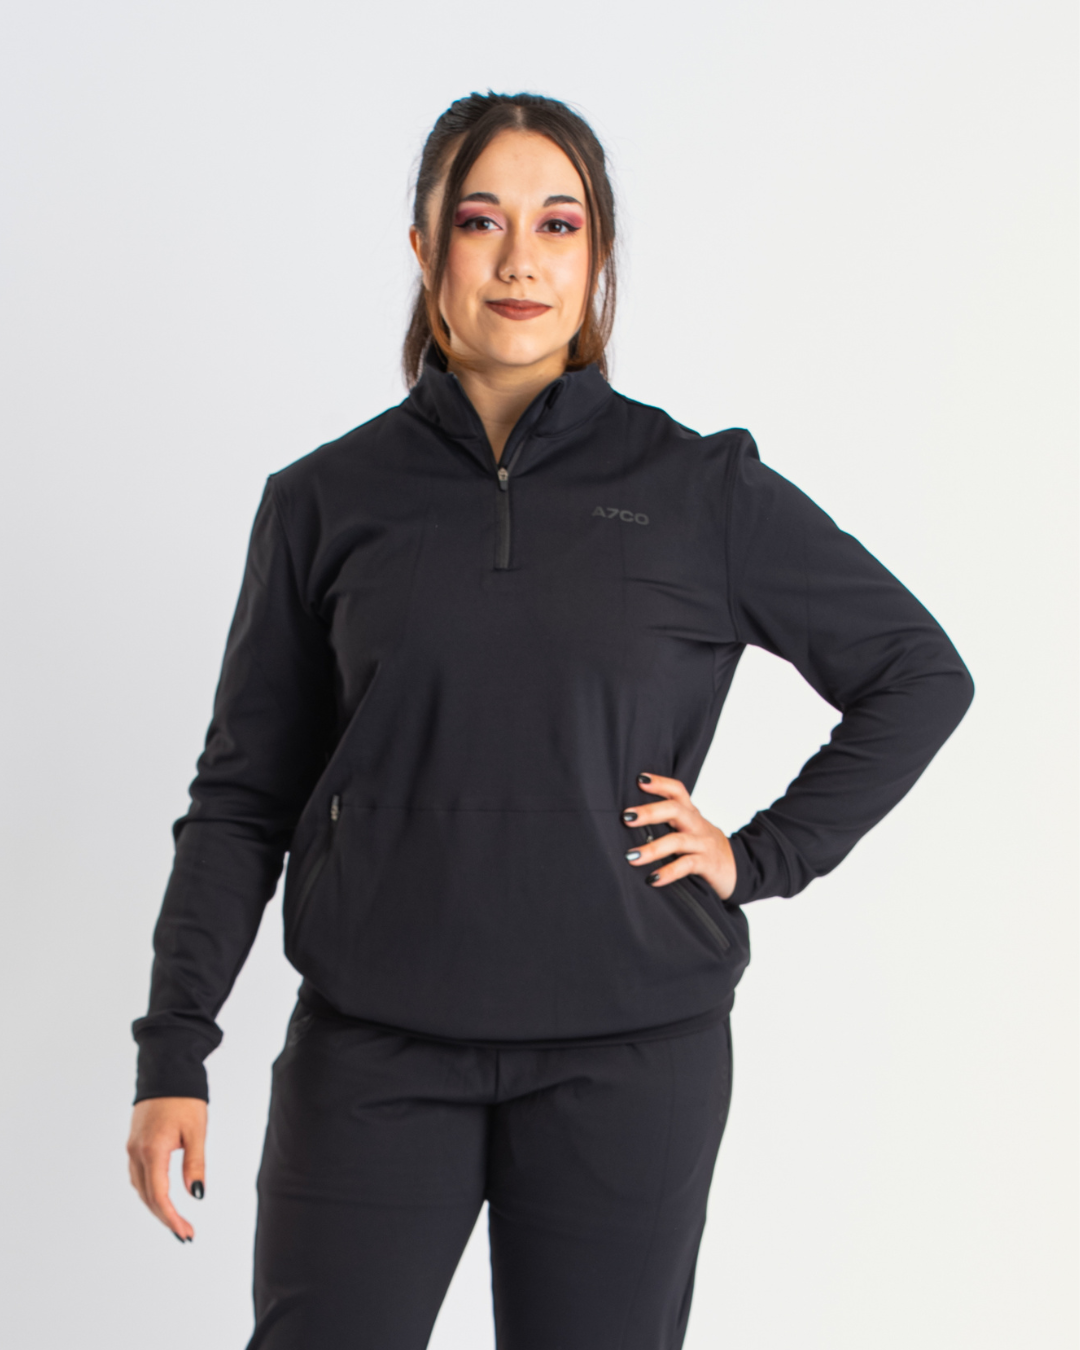 Cobra Quarter Zip Jacket offers unmatched comfort, and style for all strength athletes. The moisture-wicking fabric keeps you dry and comfortable in and out the gym. Featuring a quarter zip cut with durable YKK zippers, this jacket is built for both functionality and style. Designed with a unisex fit, it pairs perfectly with our matching Cobra 360Go 1Z Joggers and Shorts. Genouill�res powerlifting shipping to France, Spain, Ireland, Germany, Italy, Sweden and EU.